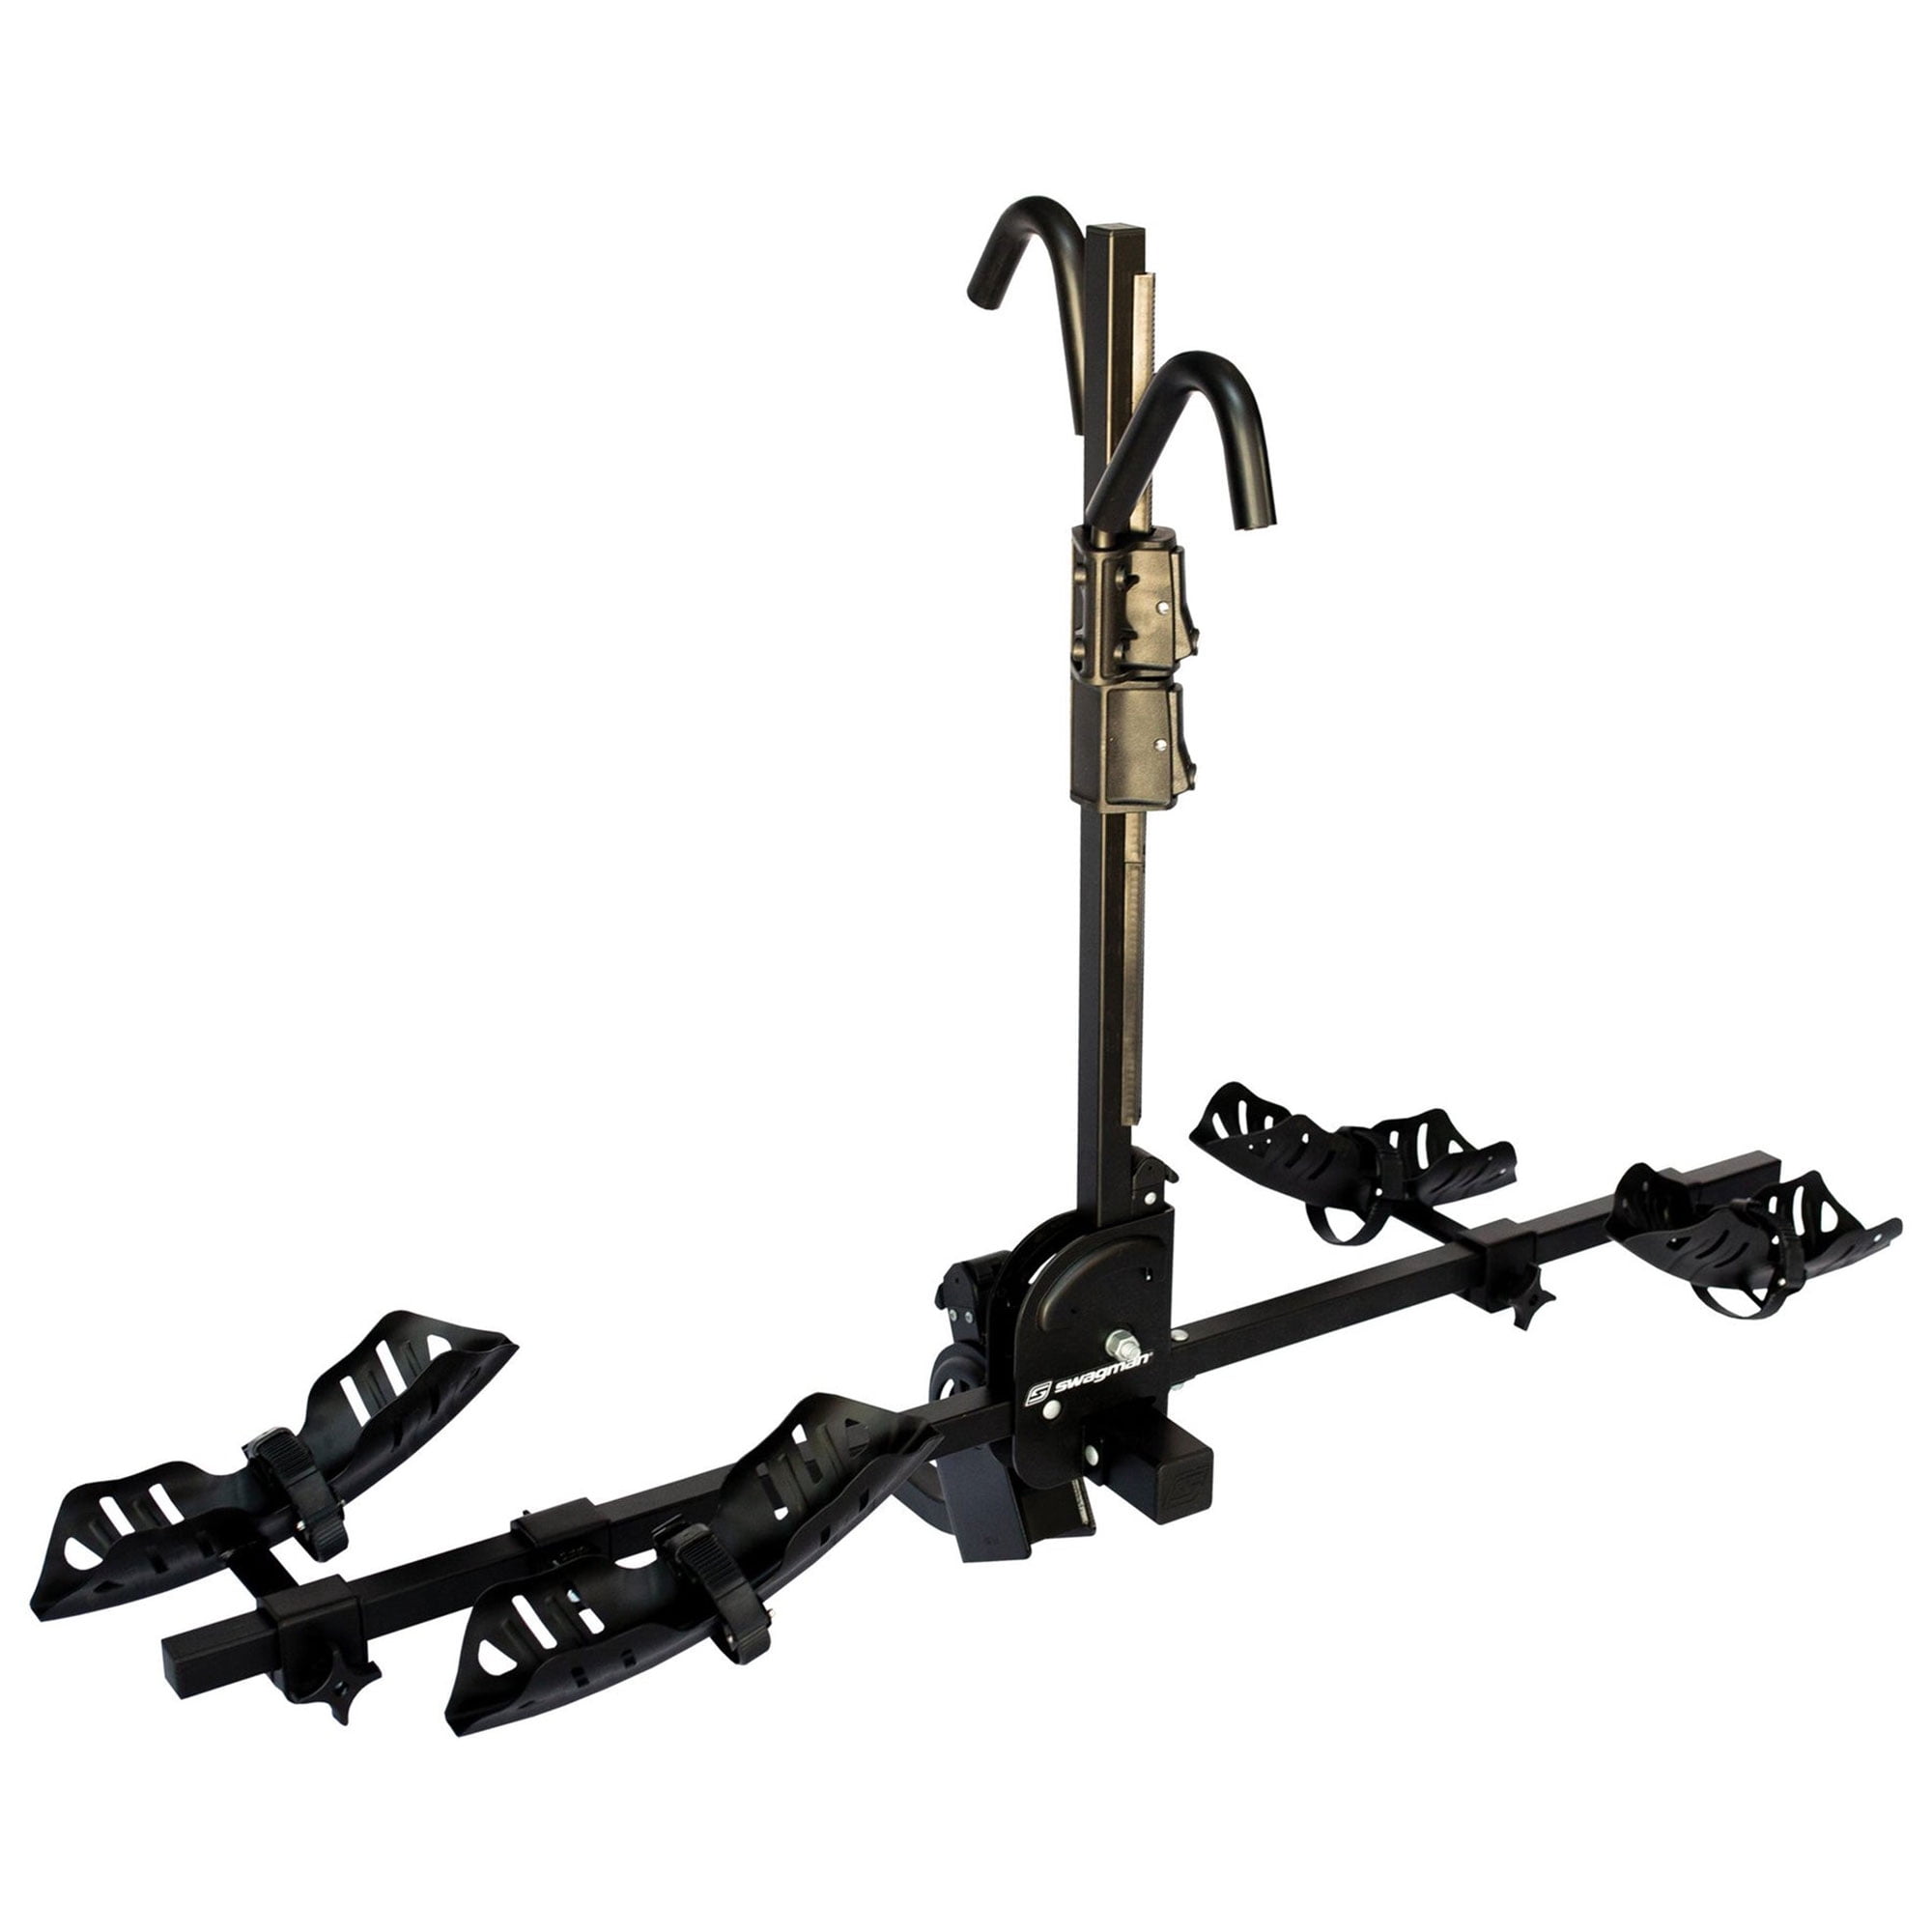 Swagman CHINOOK Hitch Mount Bike Rack for 1.25 Inch and 2 Inch ...